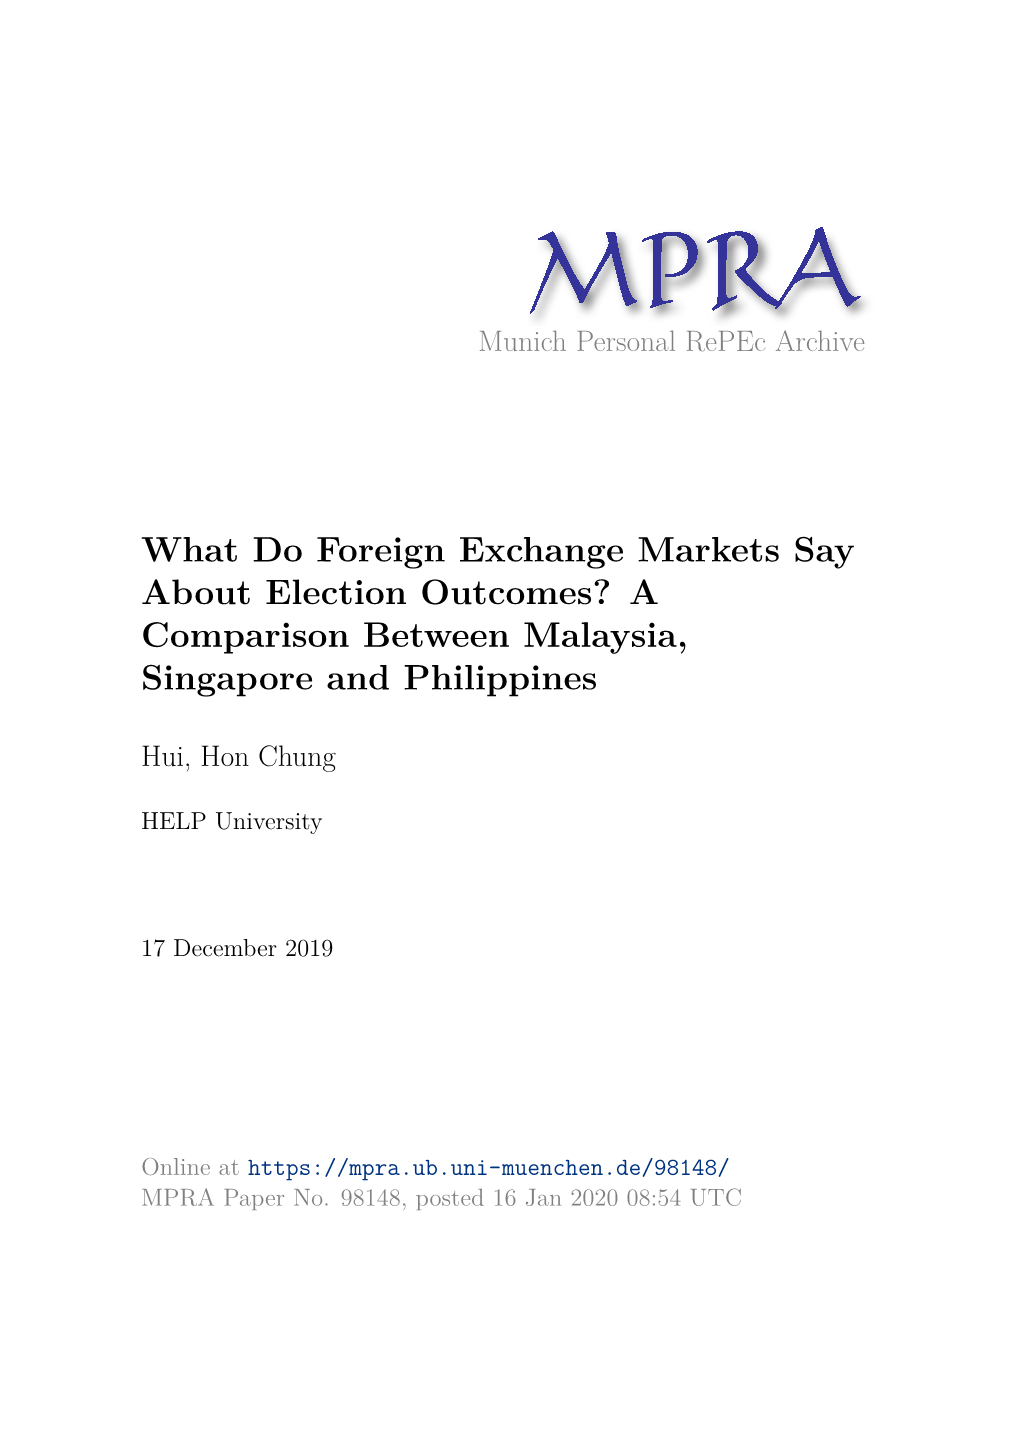 What Do Foreign Exchange Markets Say About Election Outcomes? a Comparison Between Malaysia, Singapore and Philippines